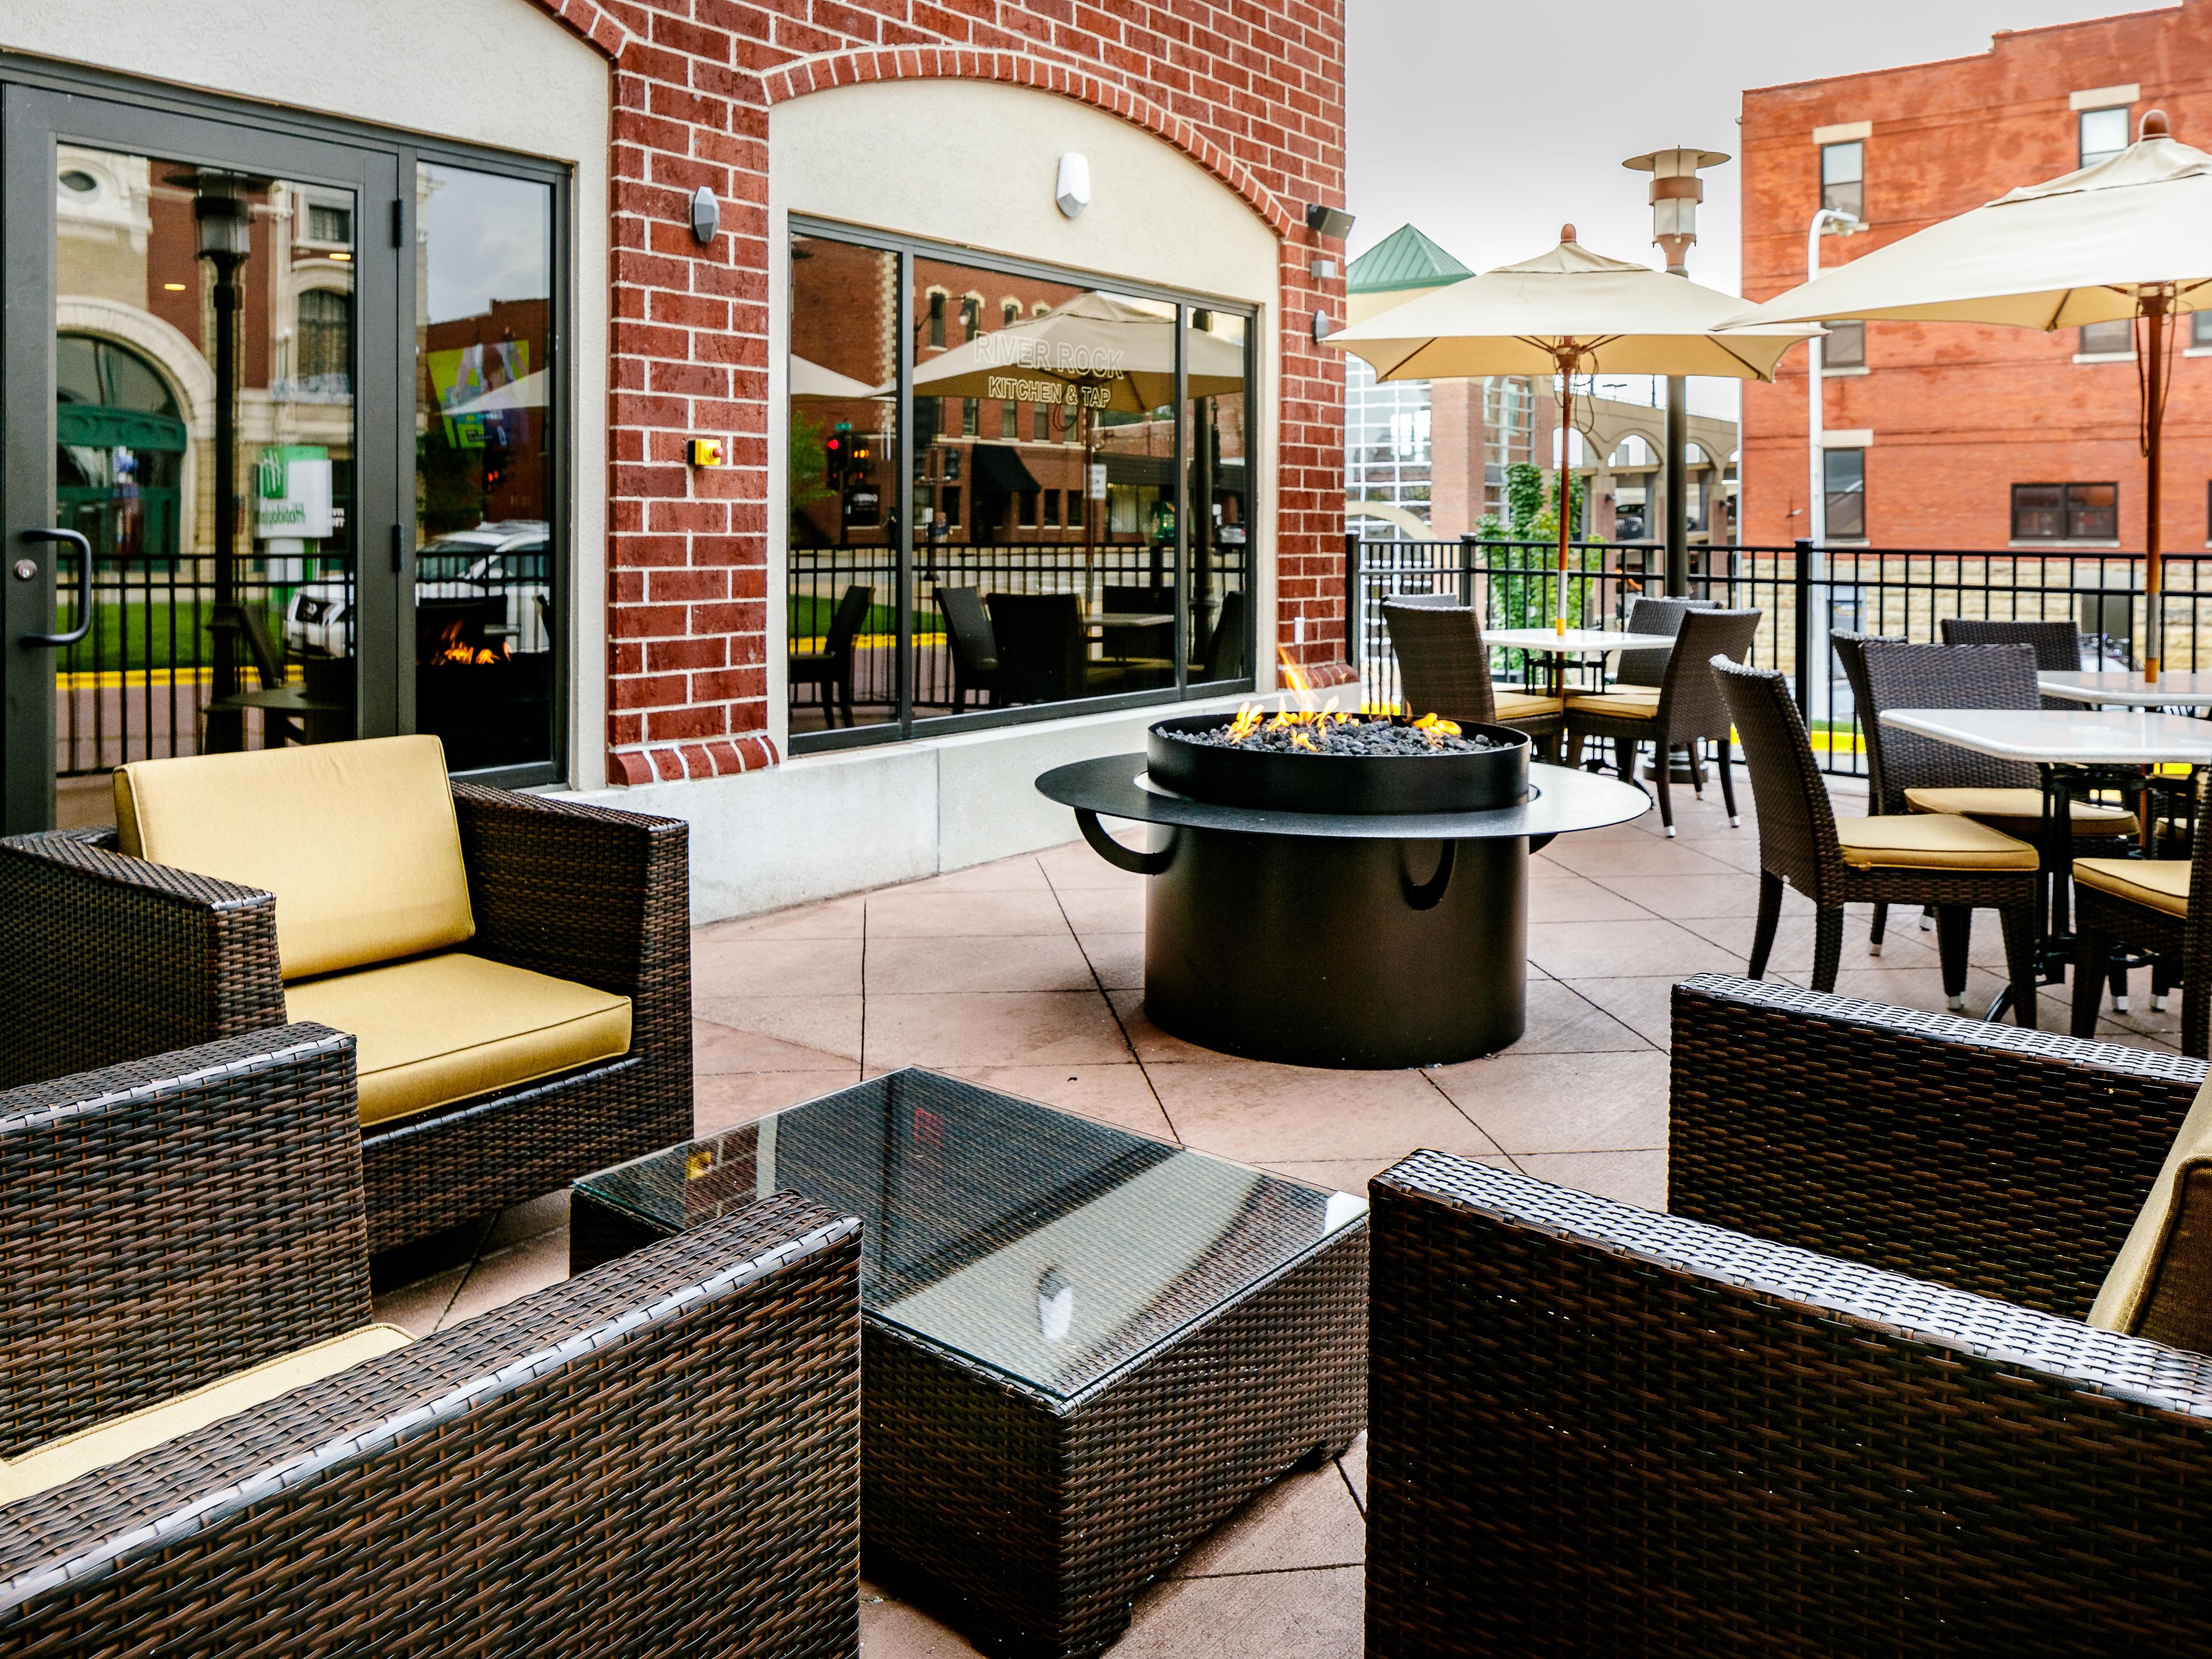 The Holiday Inn's restaurant, River Rock Kitchen and Tap, features a comfortable patio area for dinning with a view of Main Street. You can enjoy our fire pit, sip wine, or just watch the people go bye.